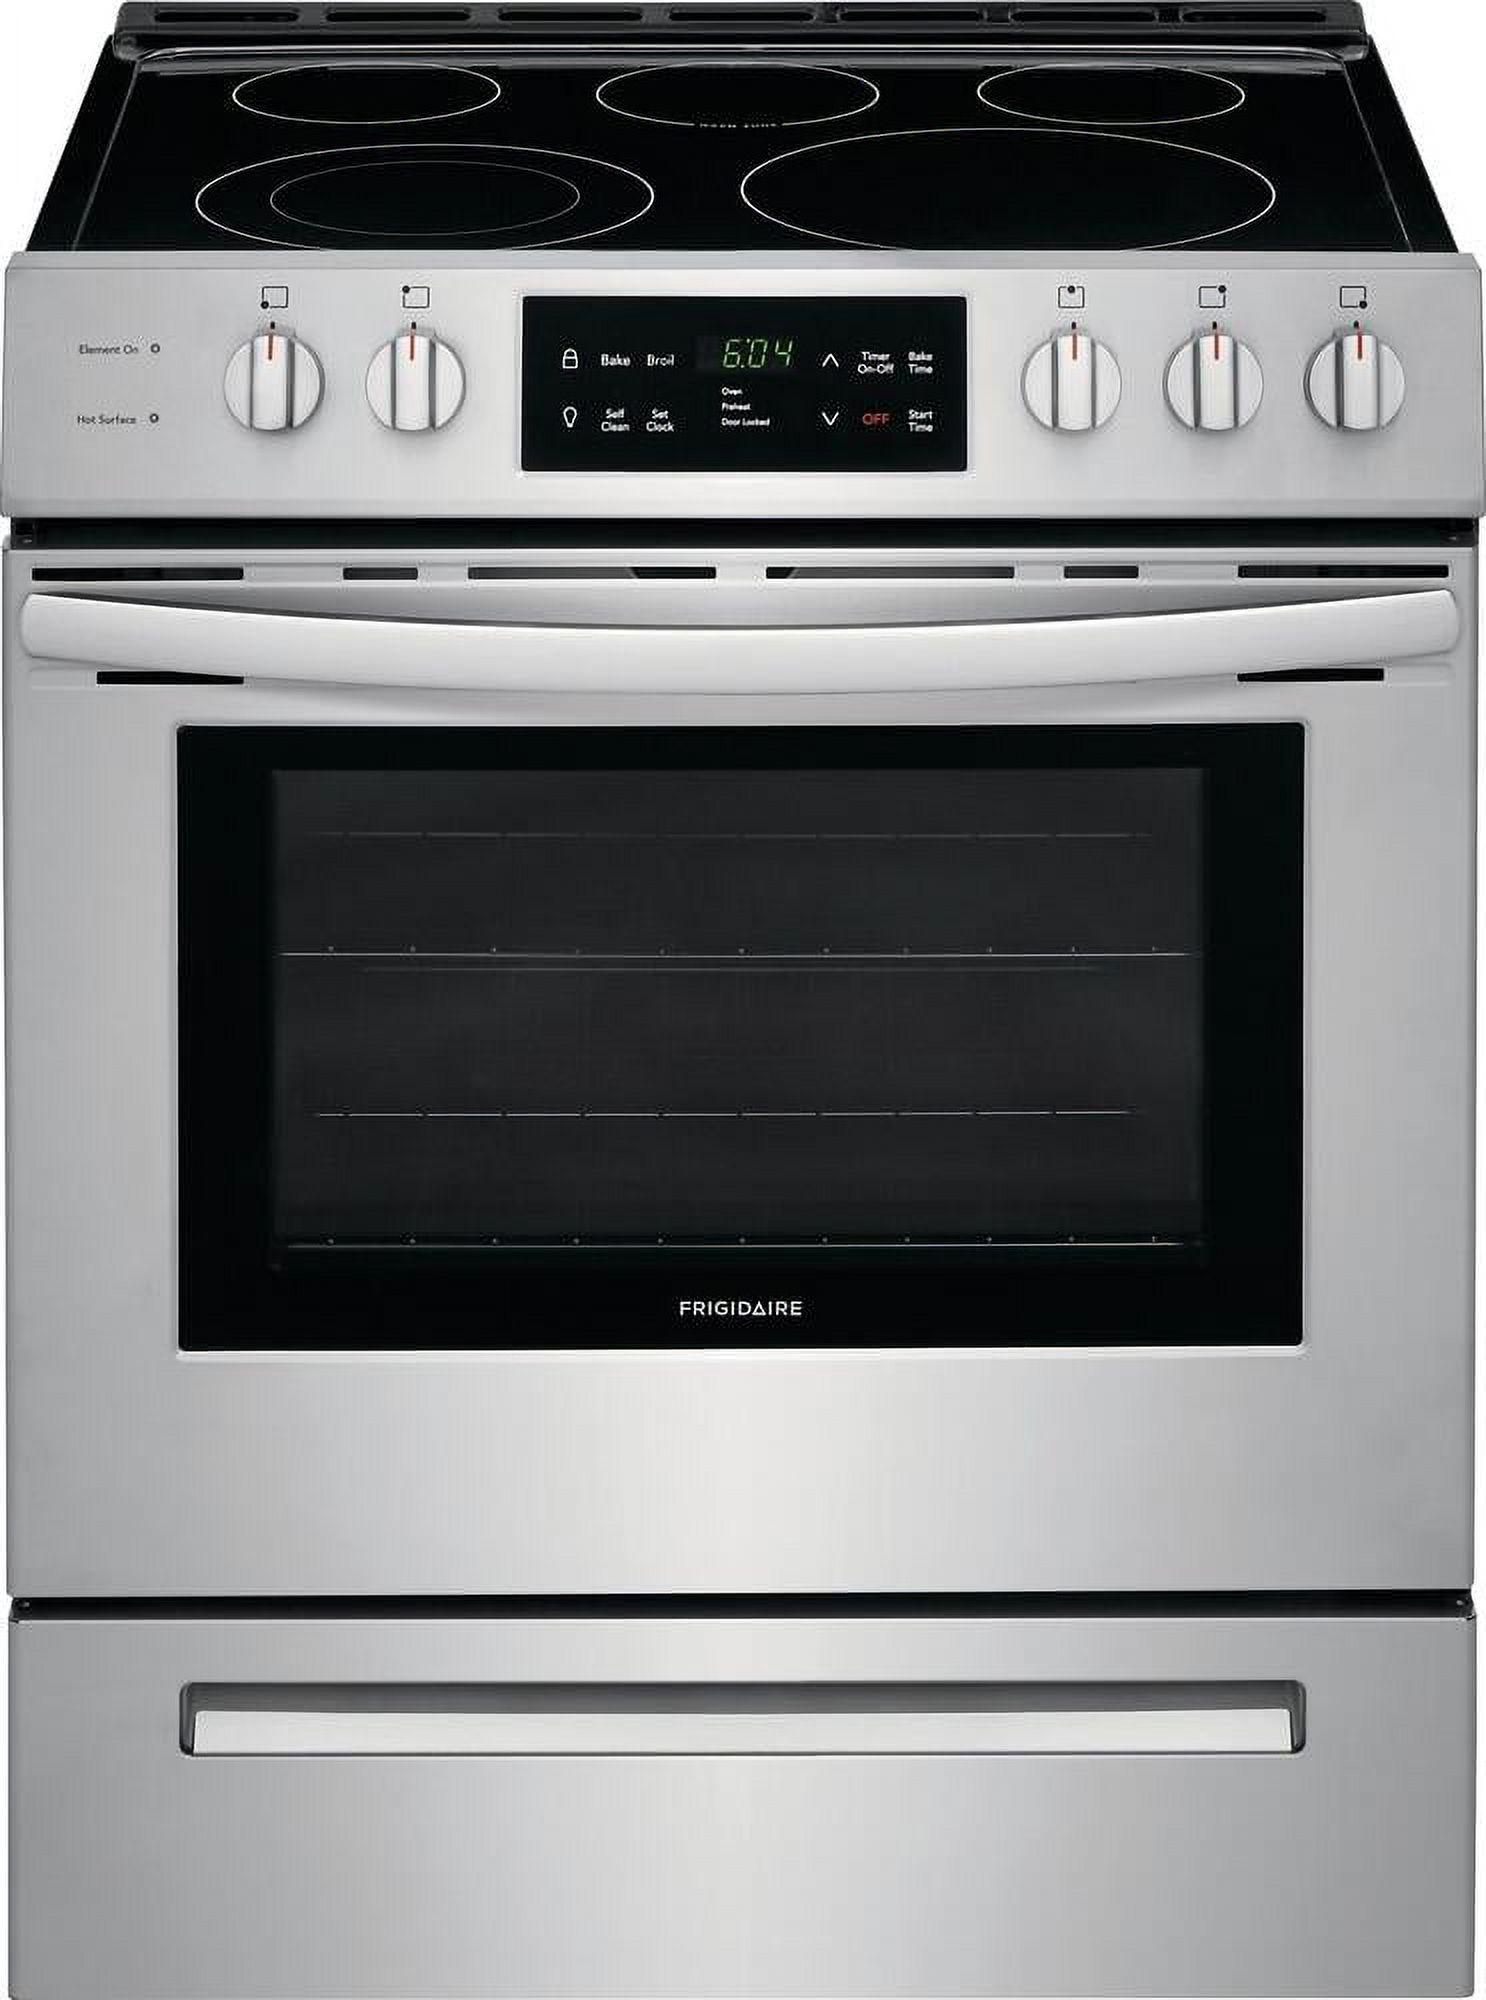 Frigidaire FFEH3054US 30 Slide-In Electric Range with 5 Elements 5 Cu. Ft. Oven Capacity Self Clean Keep Warm Zone in Stainless Steel - image 2 of 11